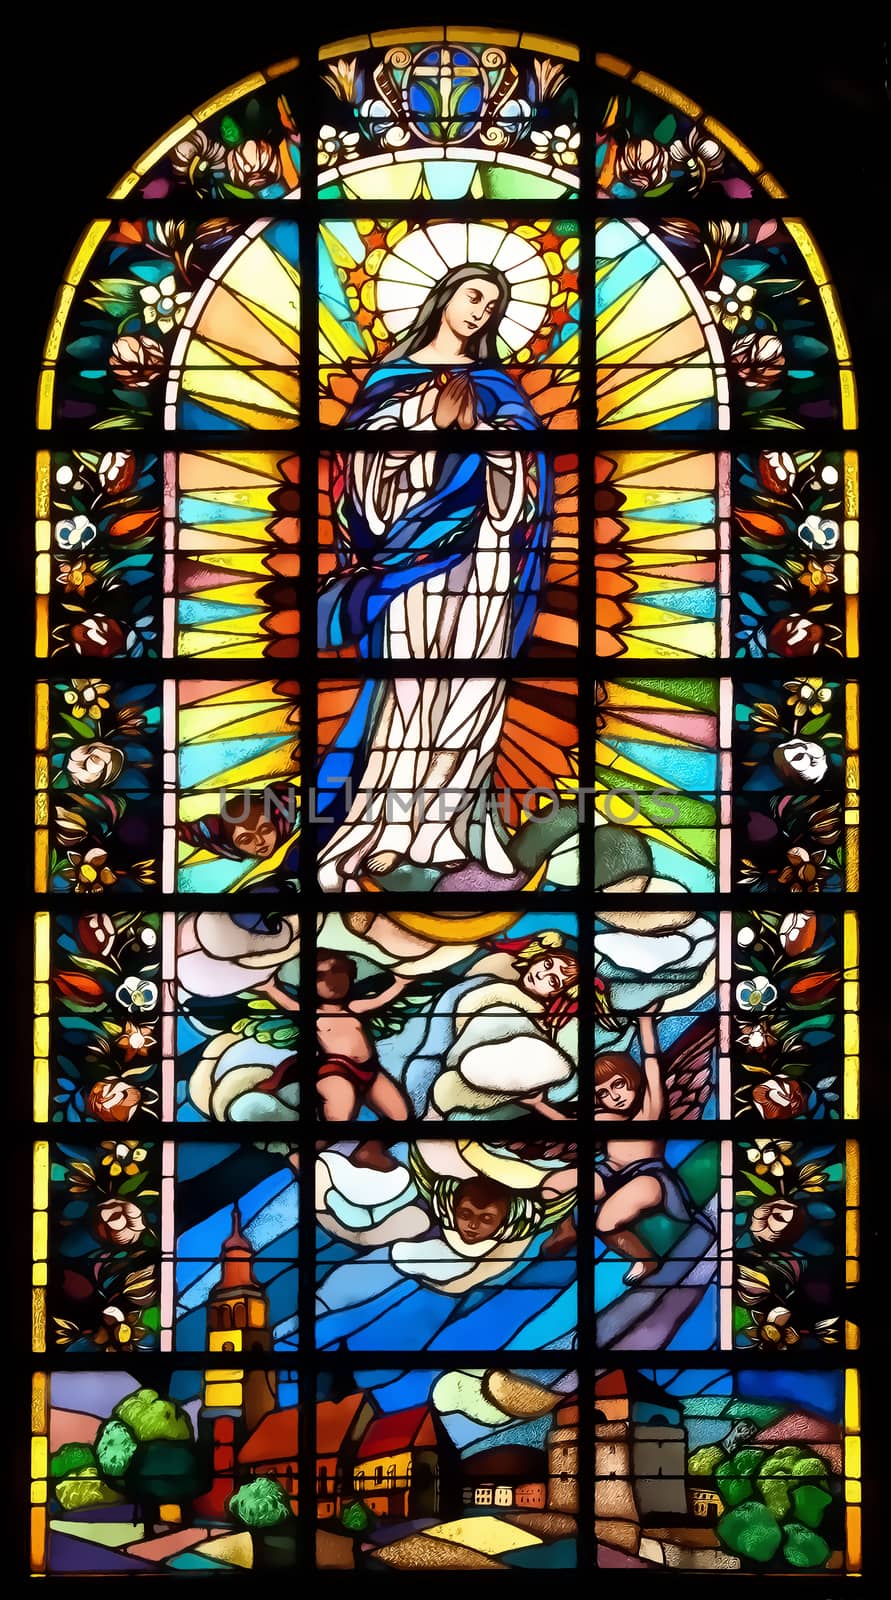 Biblical stained glass by Attila